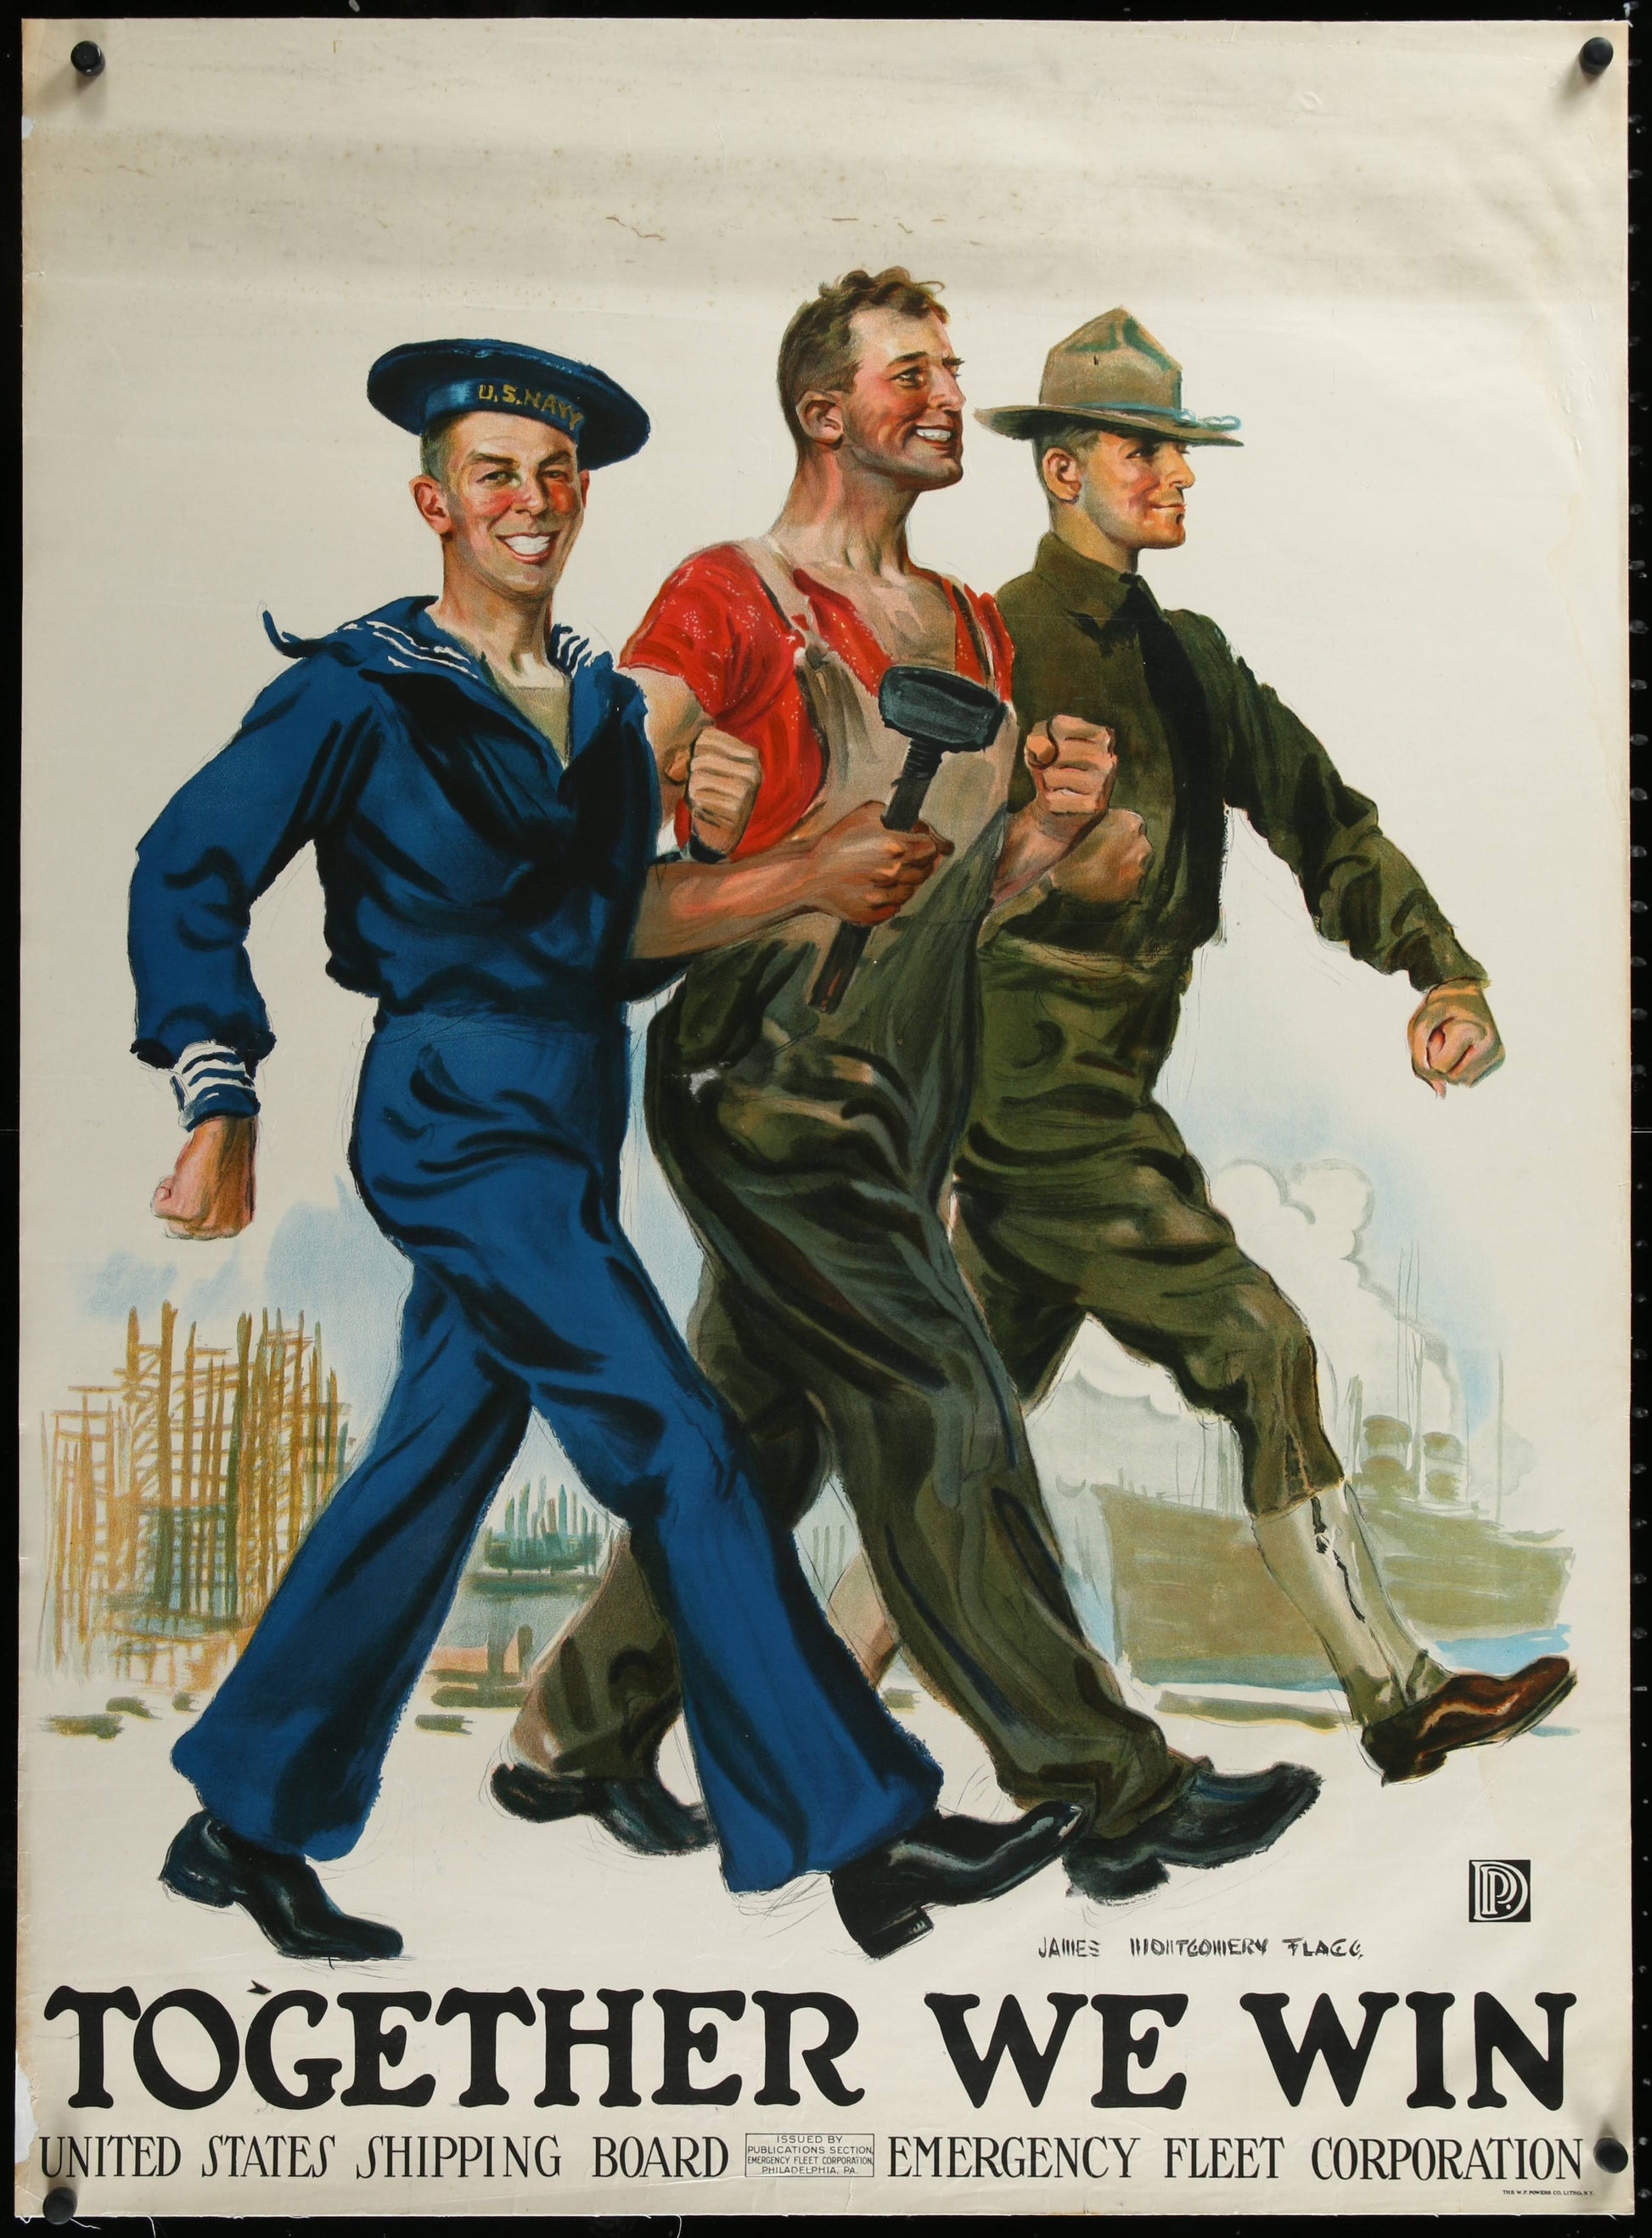 "Together We Win" WWI Home Front Poster by James Montgomery Flagg (1917) - posterpalace.com